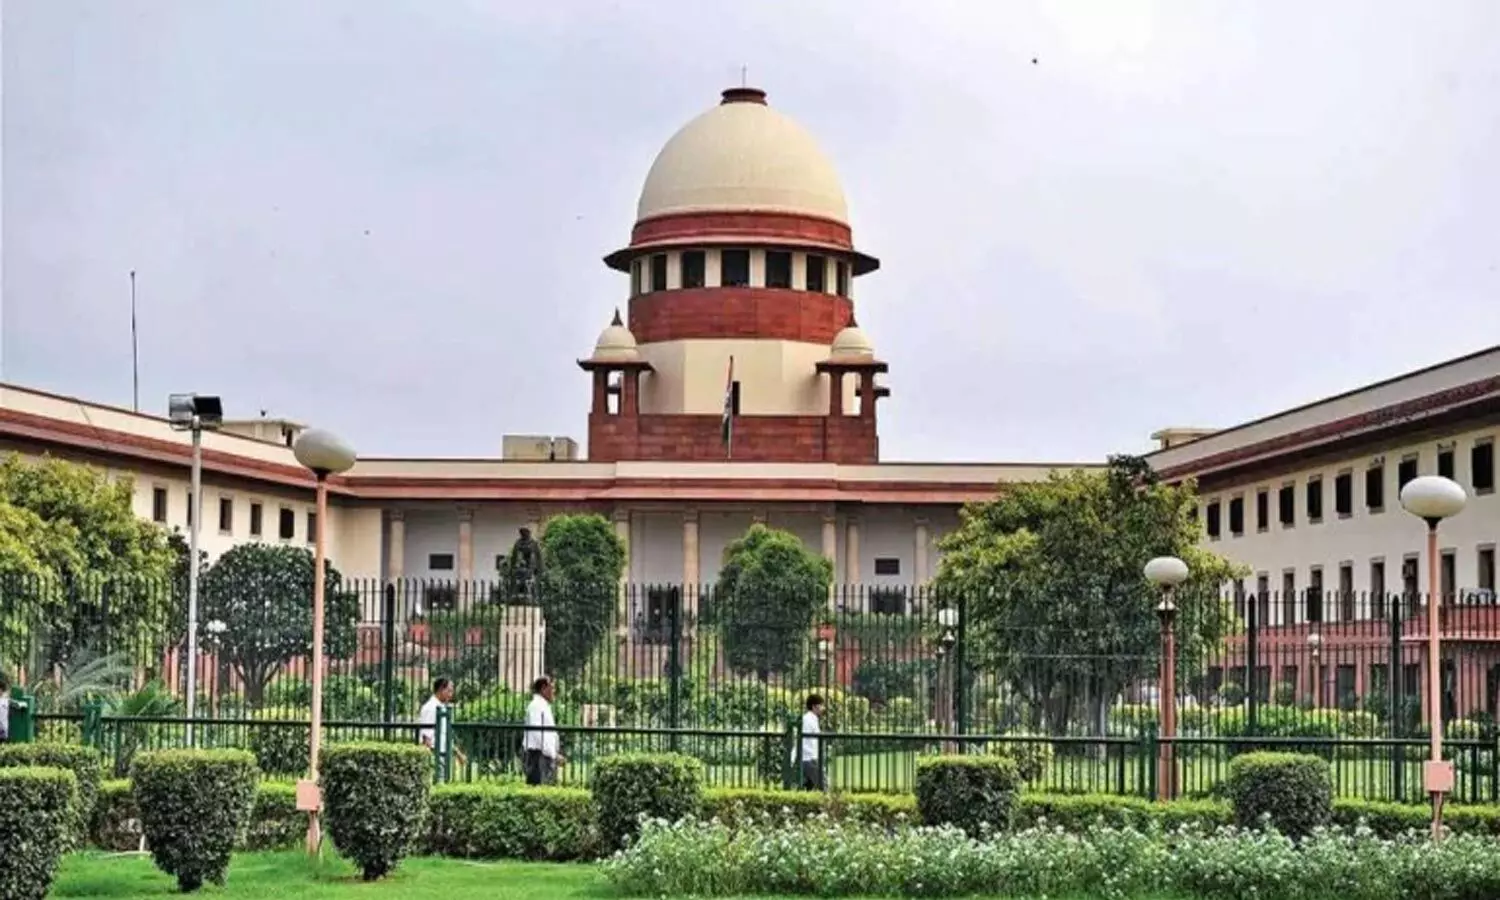 Remove Two finger tests from Medical Syllabus, train HCPs on appropriate procedure: SC slams govt